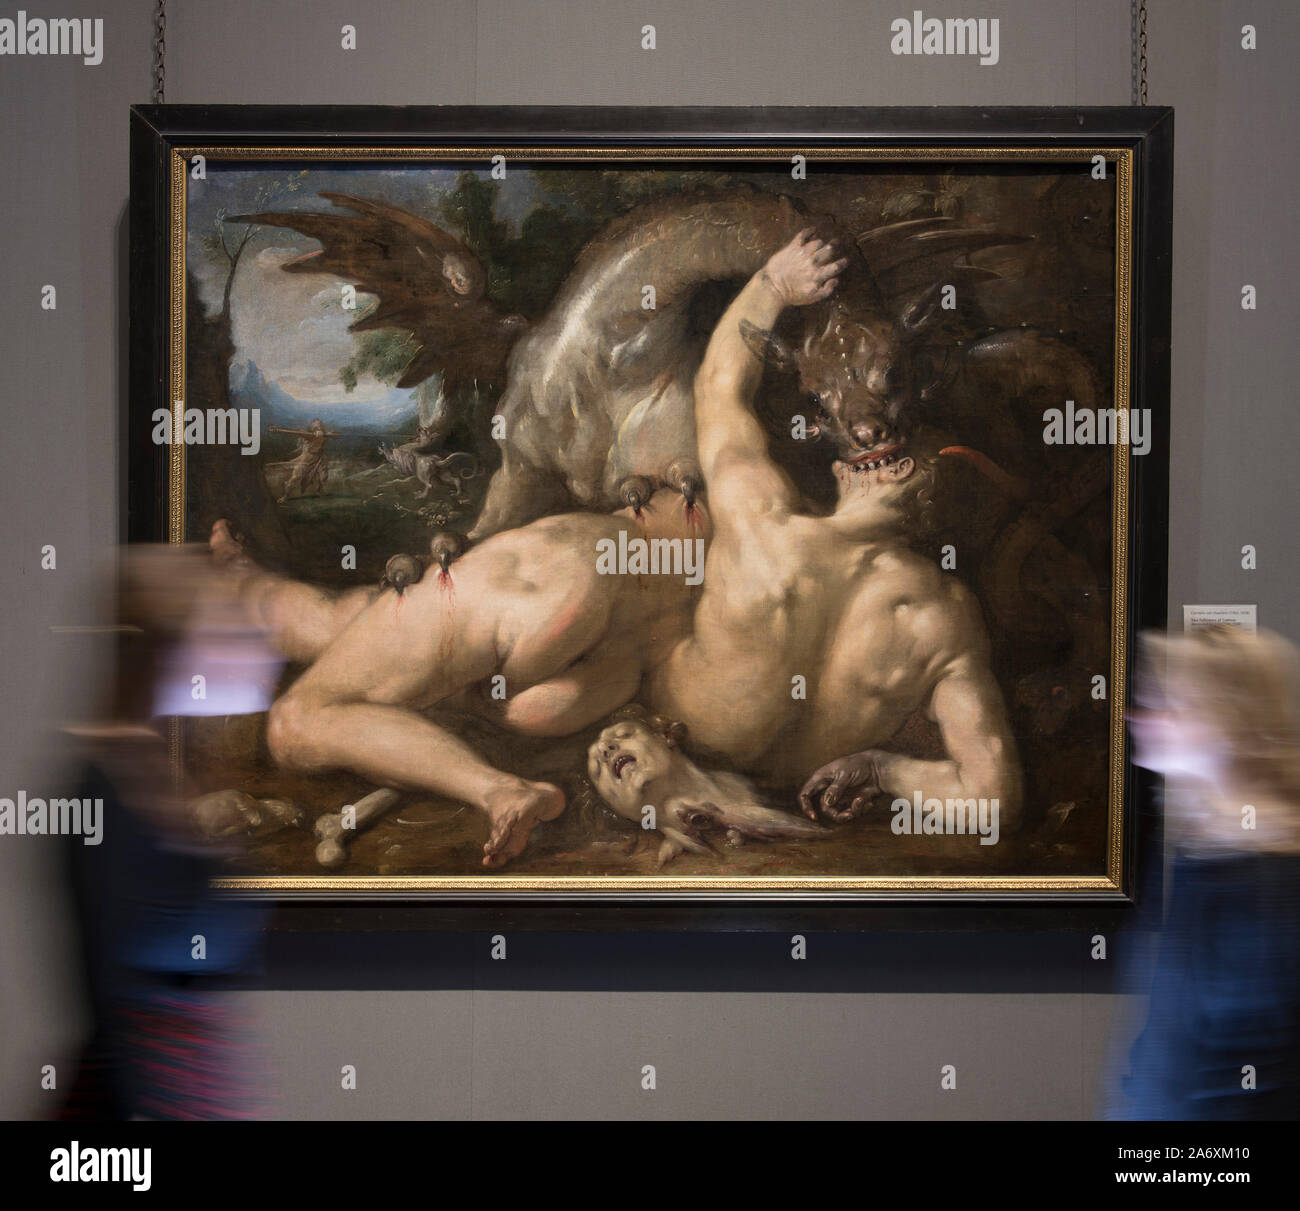 National Gallery, London, UK. 17th October 2019.  Photo embargoed until 29th October 2019. The National Gallery choose two pictures with a spooky horror Halloween theme for the 31st October, posed with members of staff. Image: Two Followers of Cadmus devoured by a Dragon. Cornelius van Haarlem, 1588. The National Gallery, London. Credit: Malcolm Park/Alamy Live News. Stock Photo